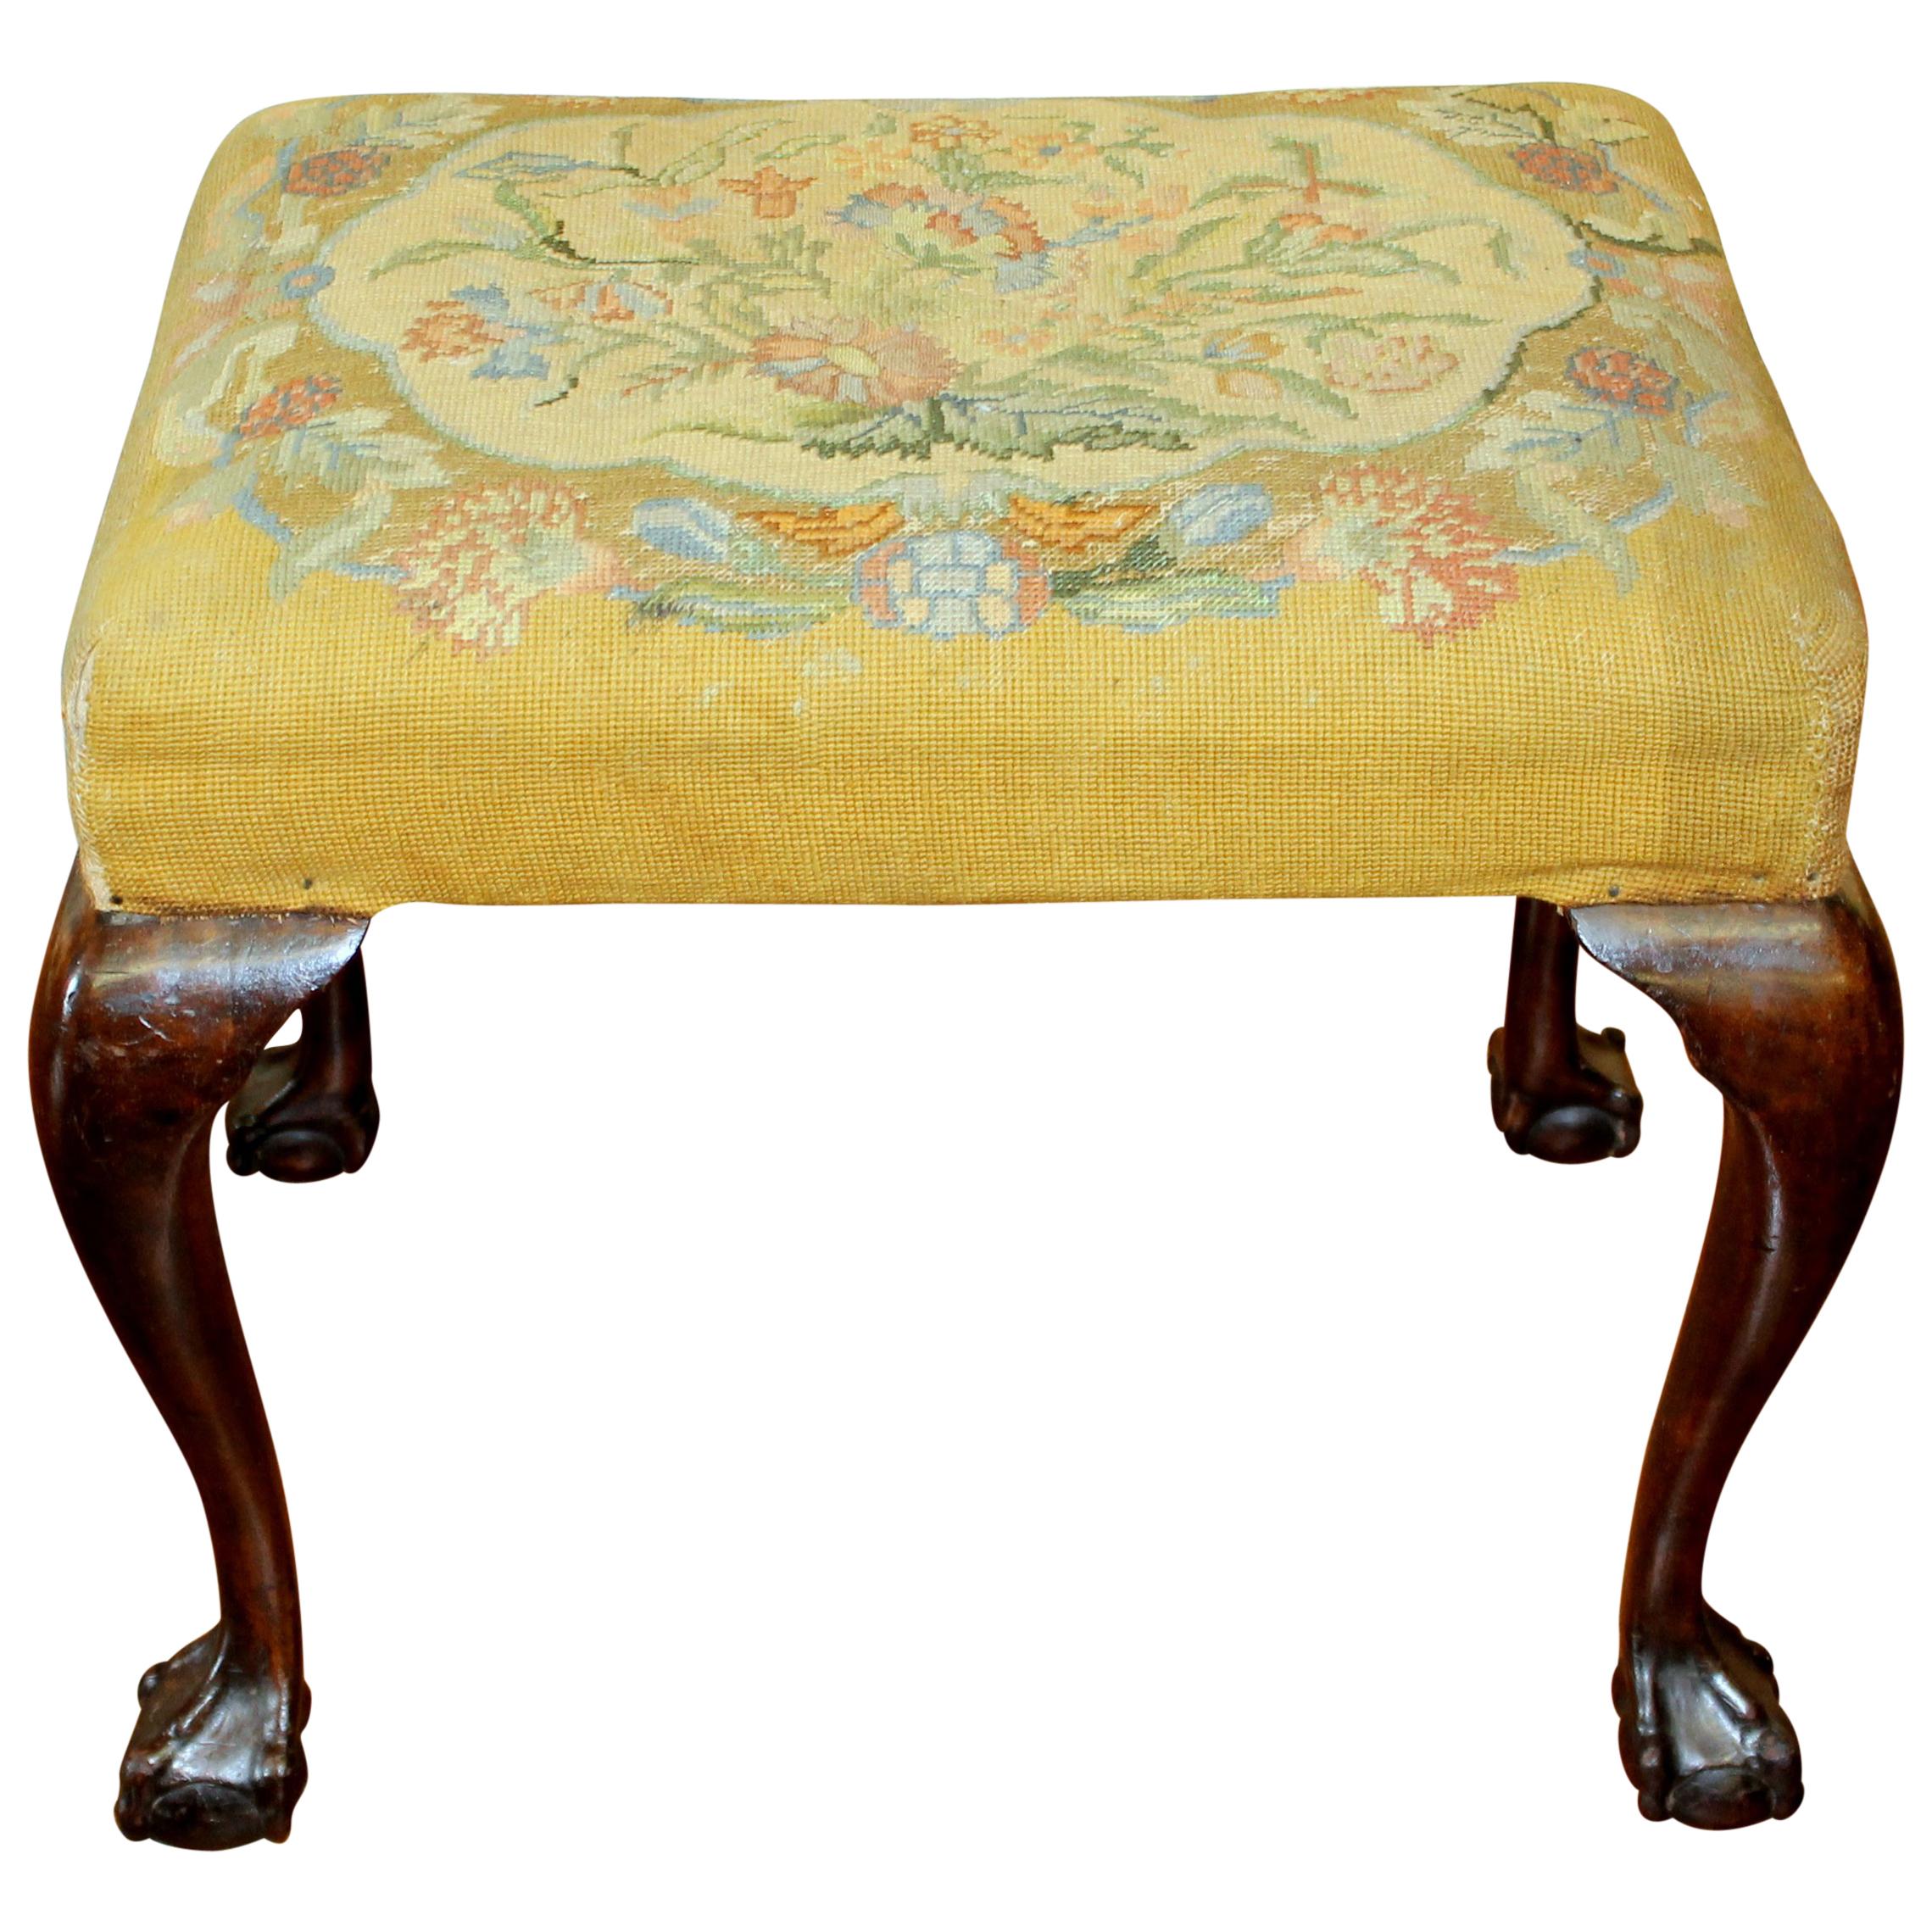 English Mahogany Chippendale Style Bench with Old Needlepoint Upholstery